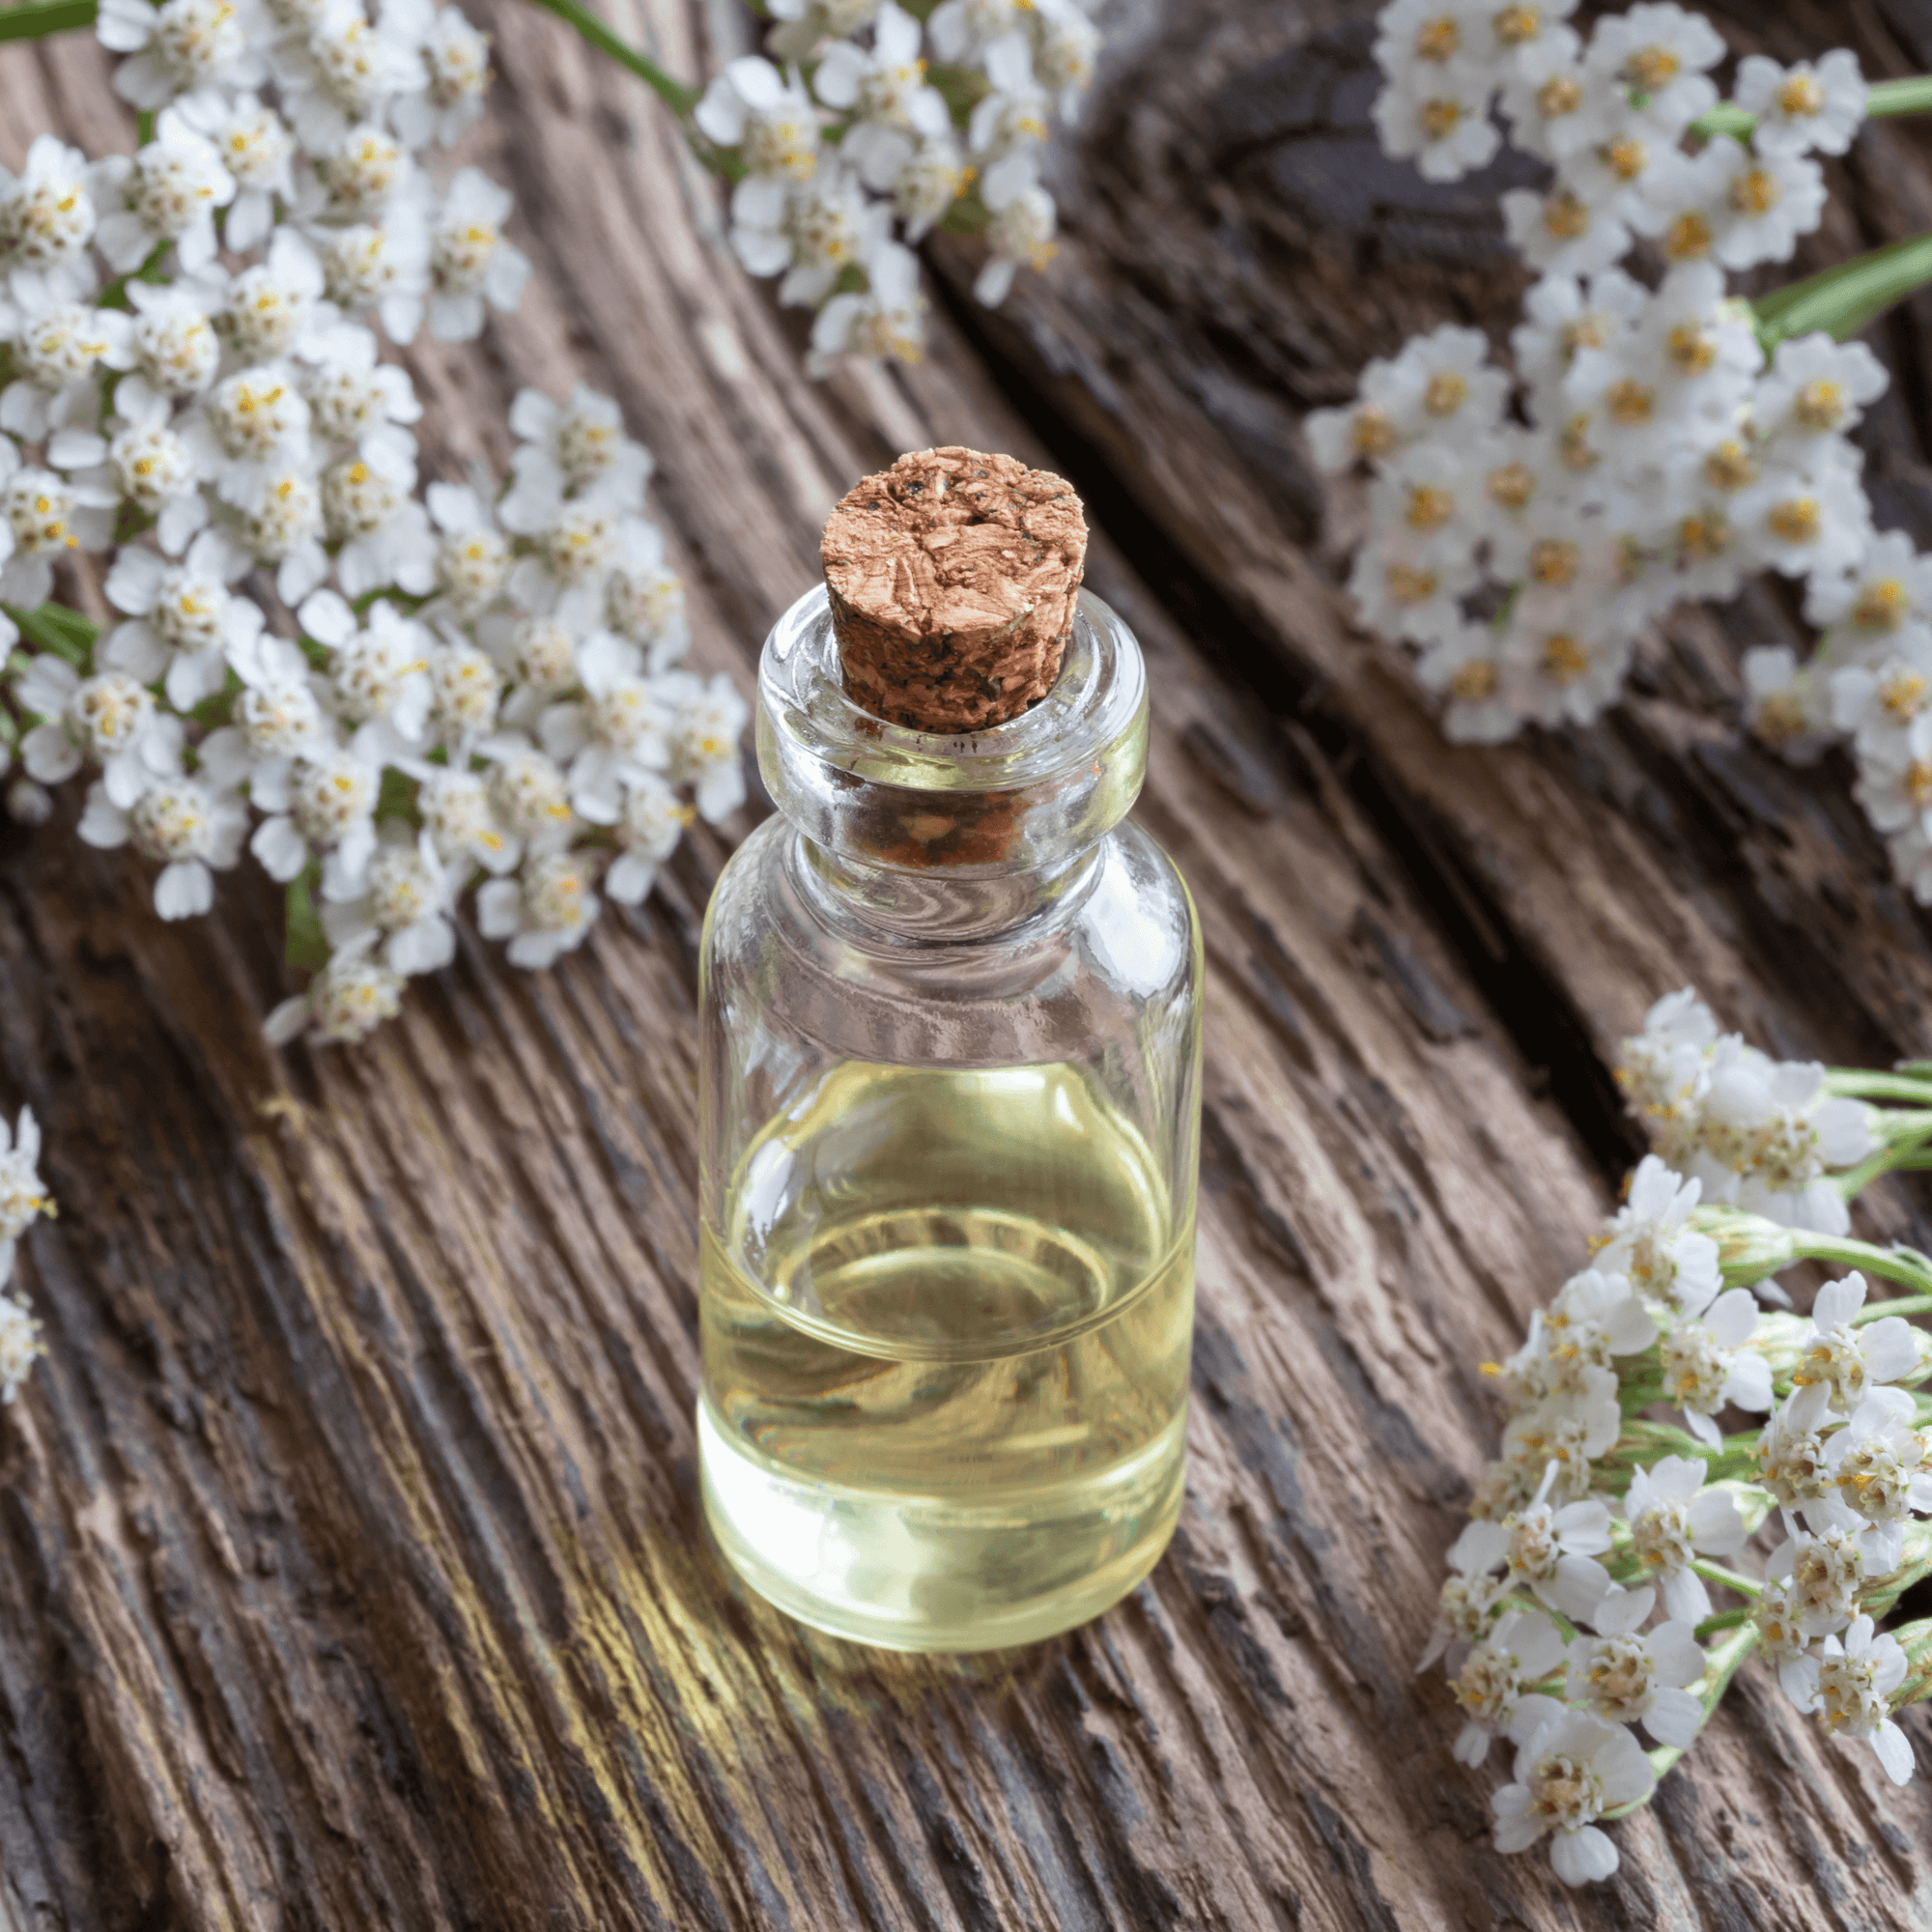 Be Bohemian Botanical Sea Serum. A corked, clear bottle filled with a yellowish tinge liquid sits on top of a heavily grooved wooden table, surrounded by white freshly picked yarrow.